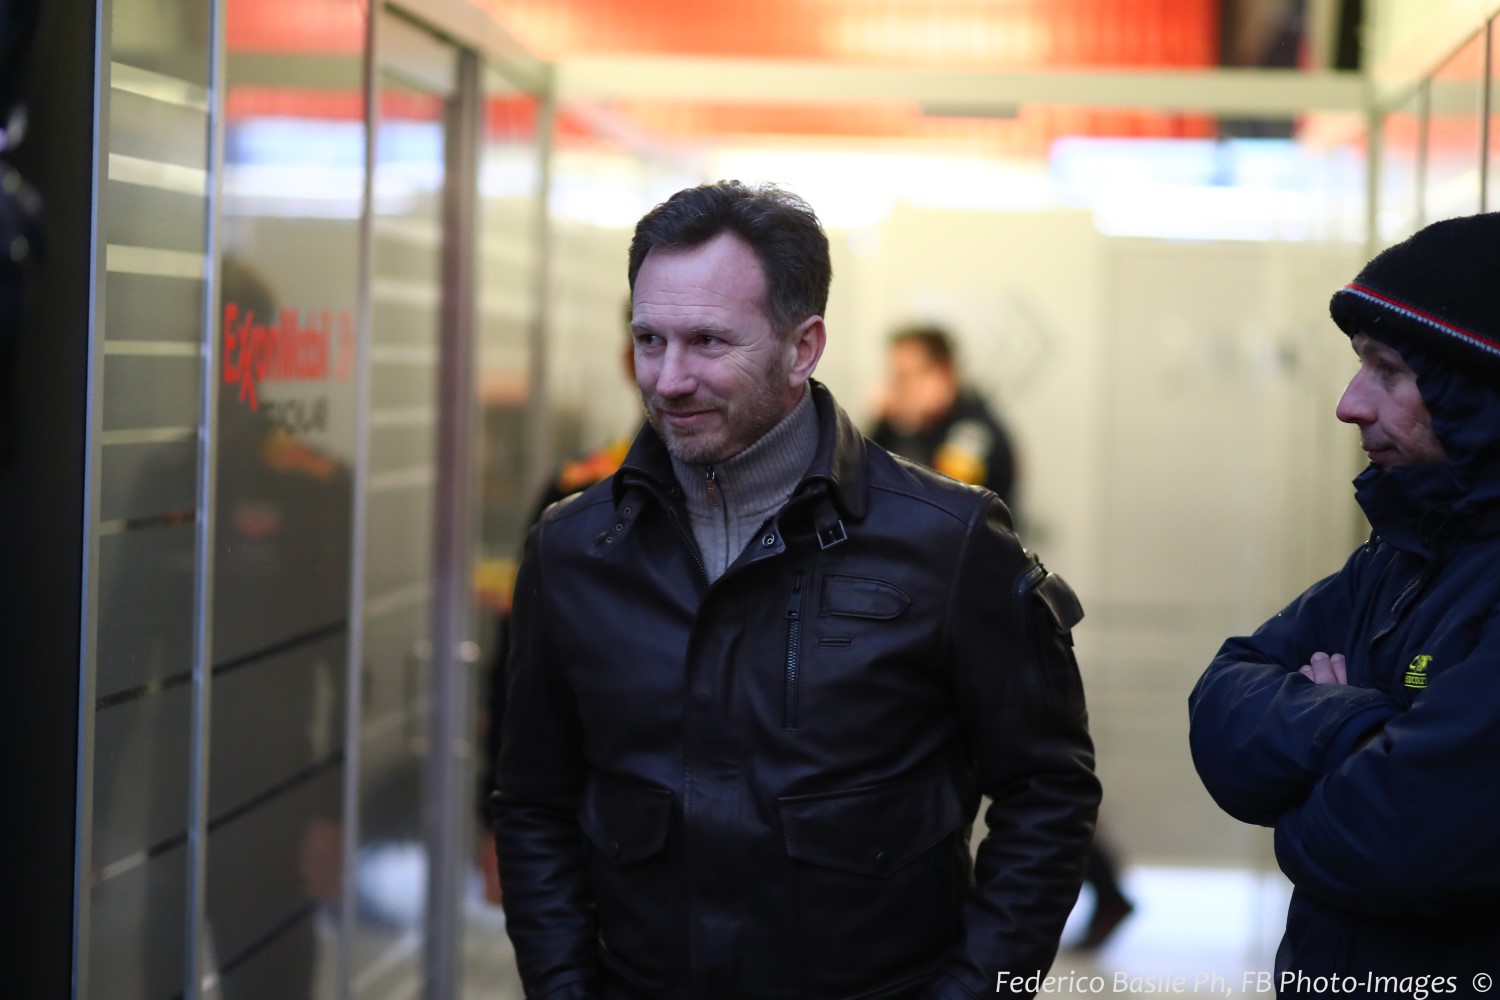 Horner was smiling on Monday but he won't be when Mercedes turns up their power